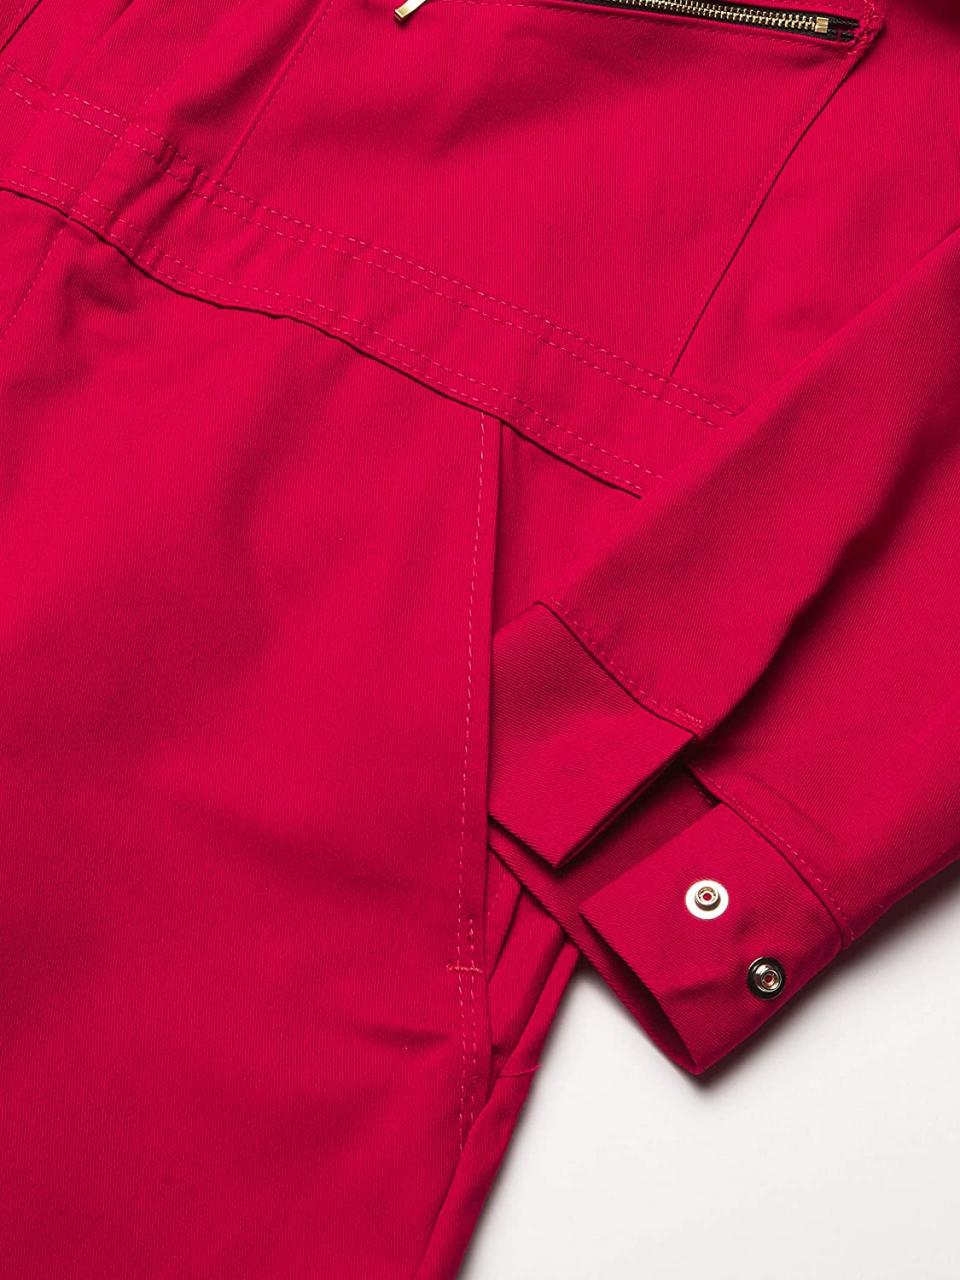 Red Kap Cotton Coveralls | Gempler's